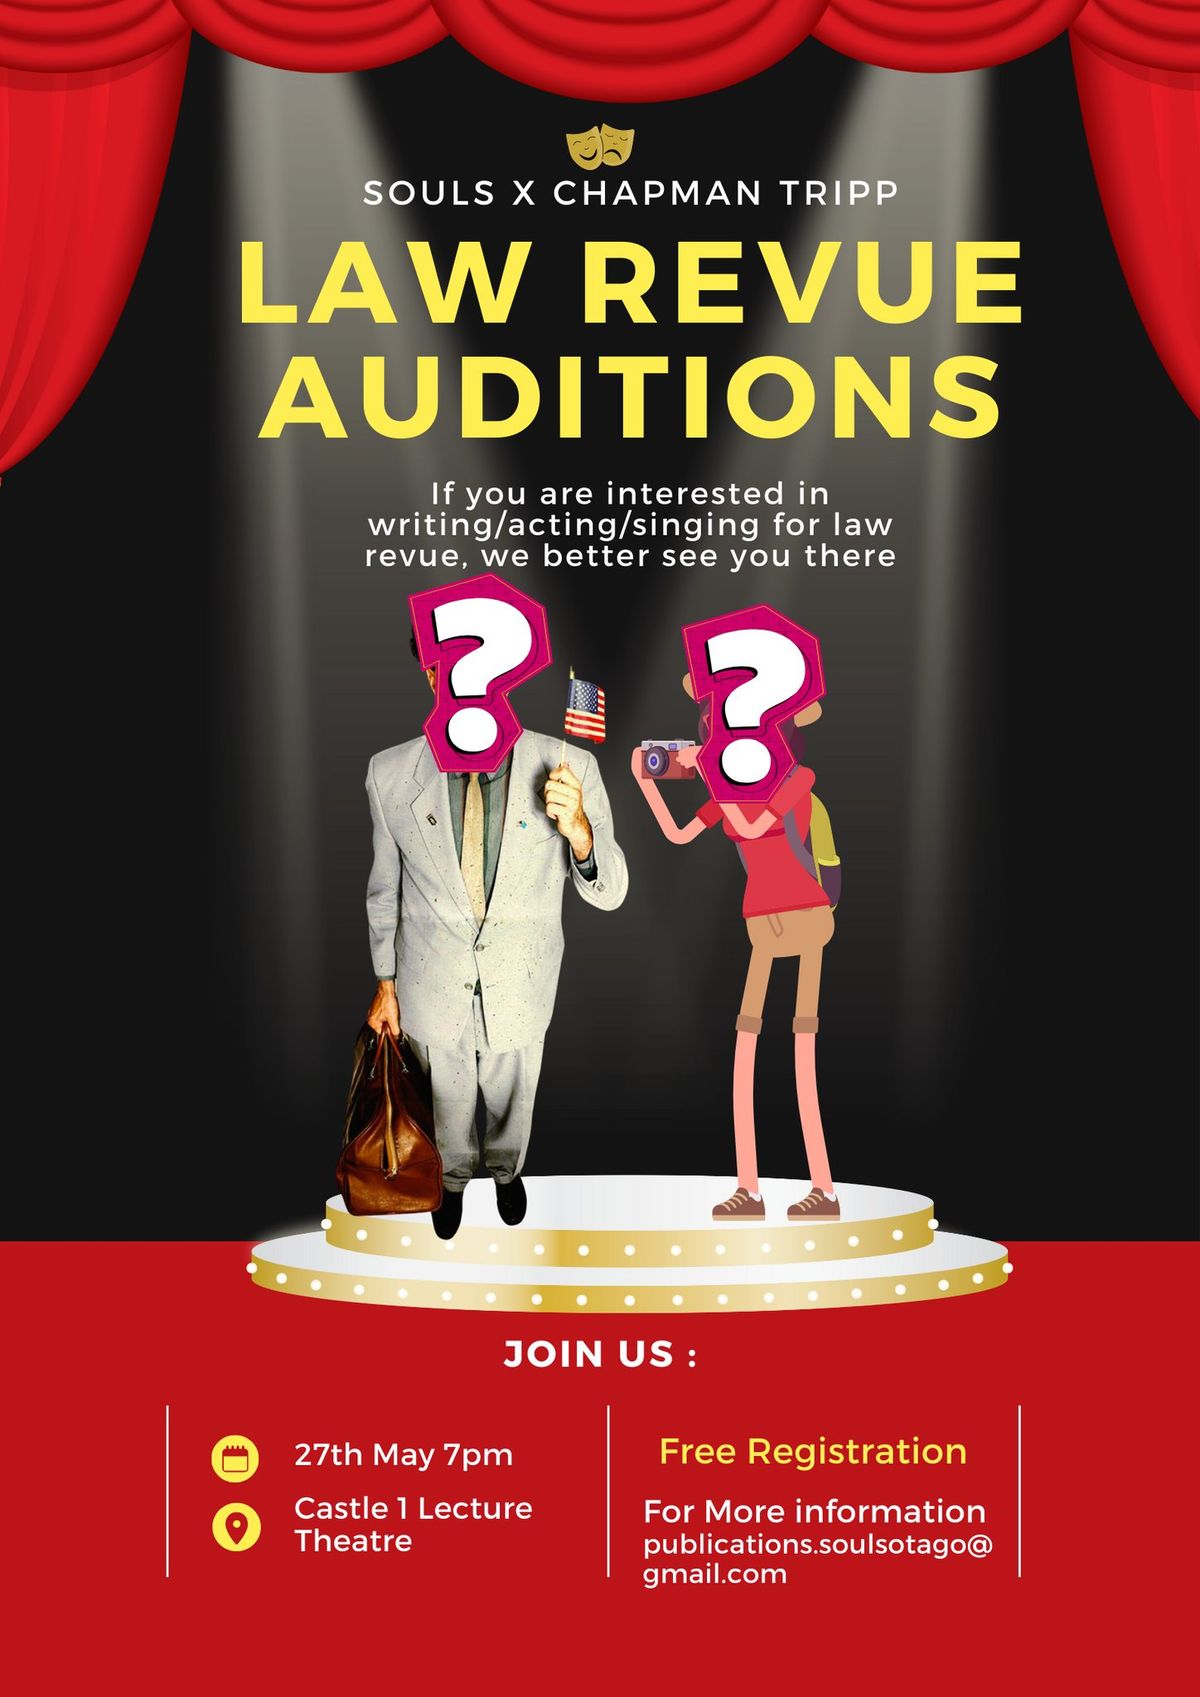 LAW REVUE AUDITIONS